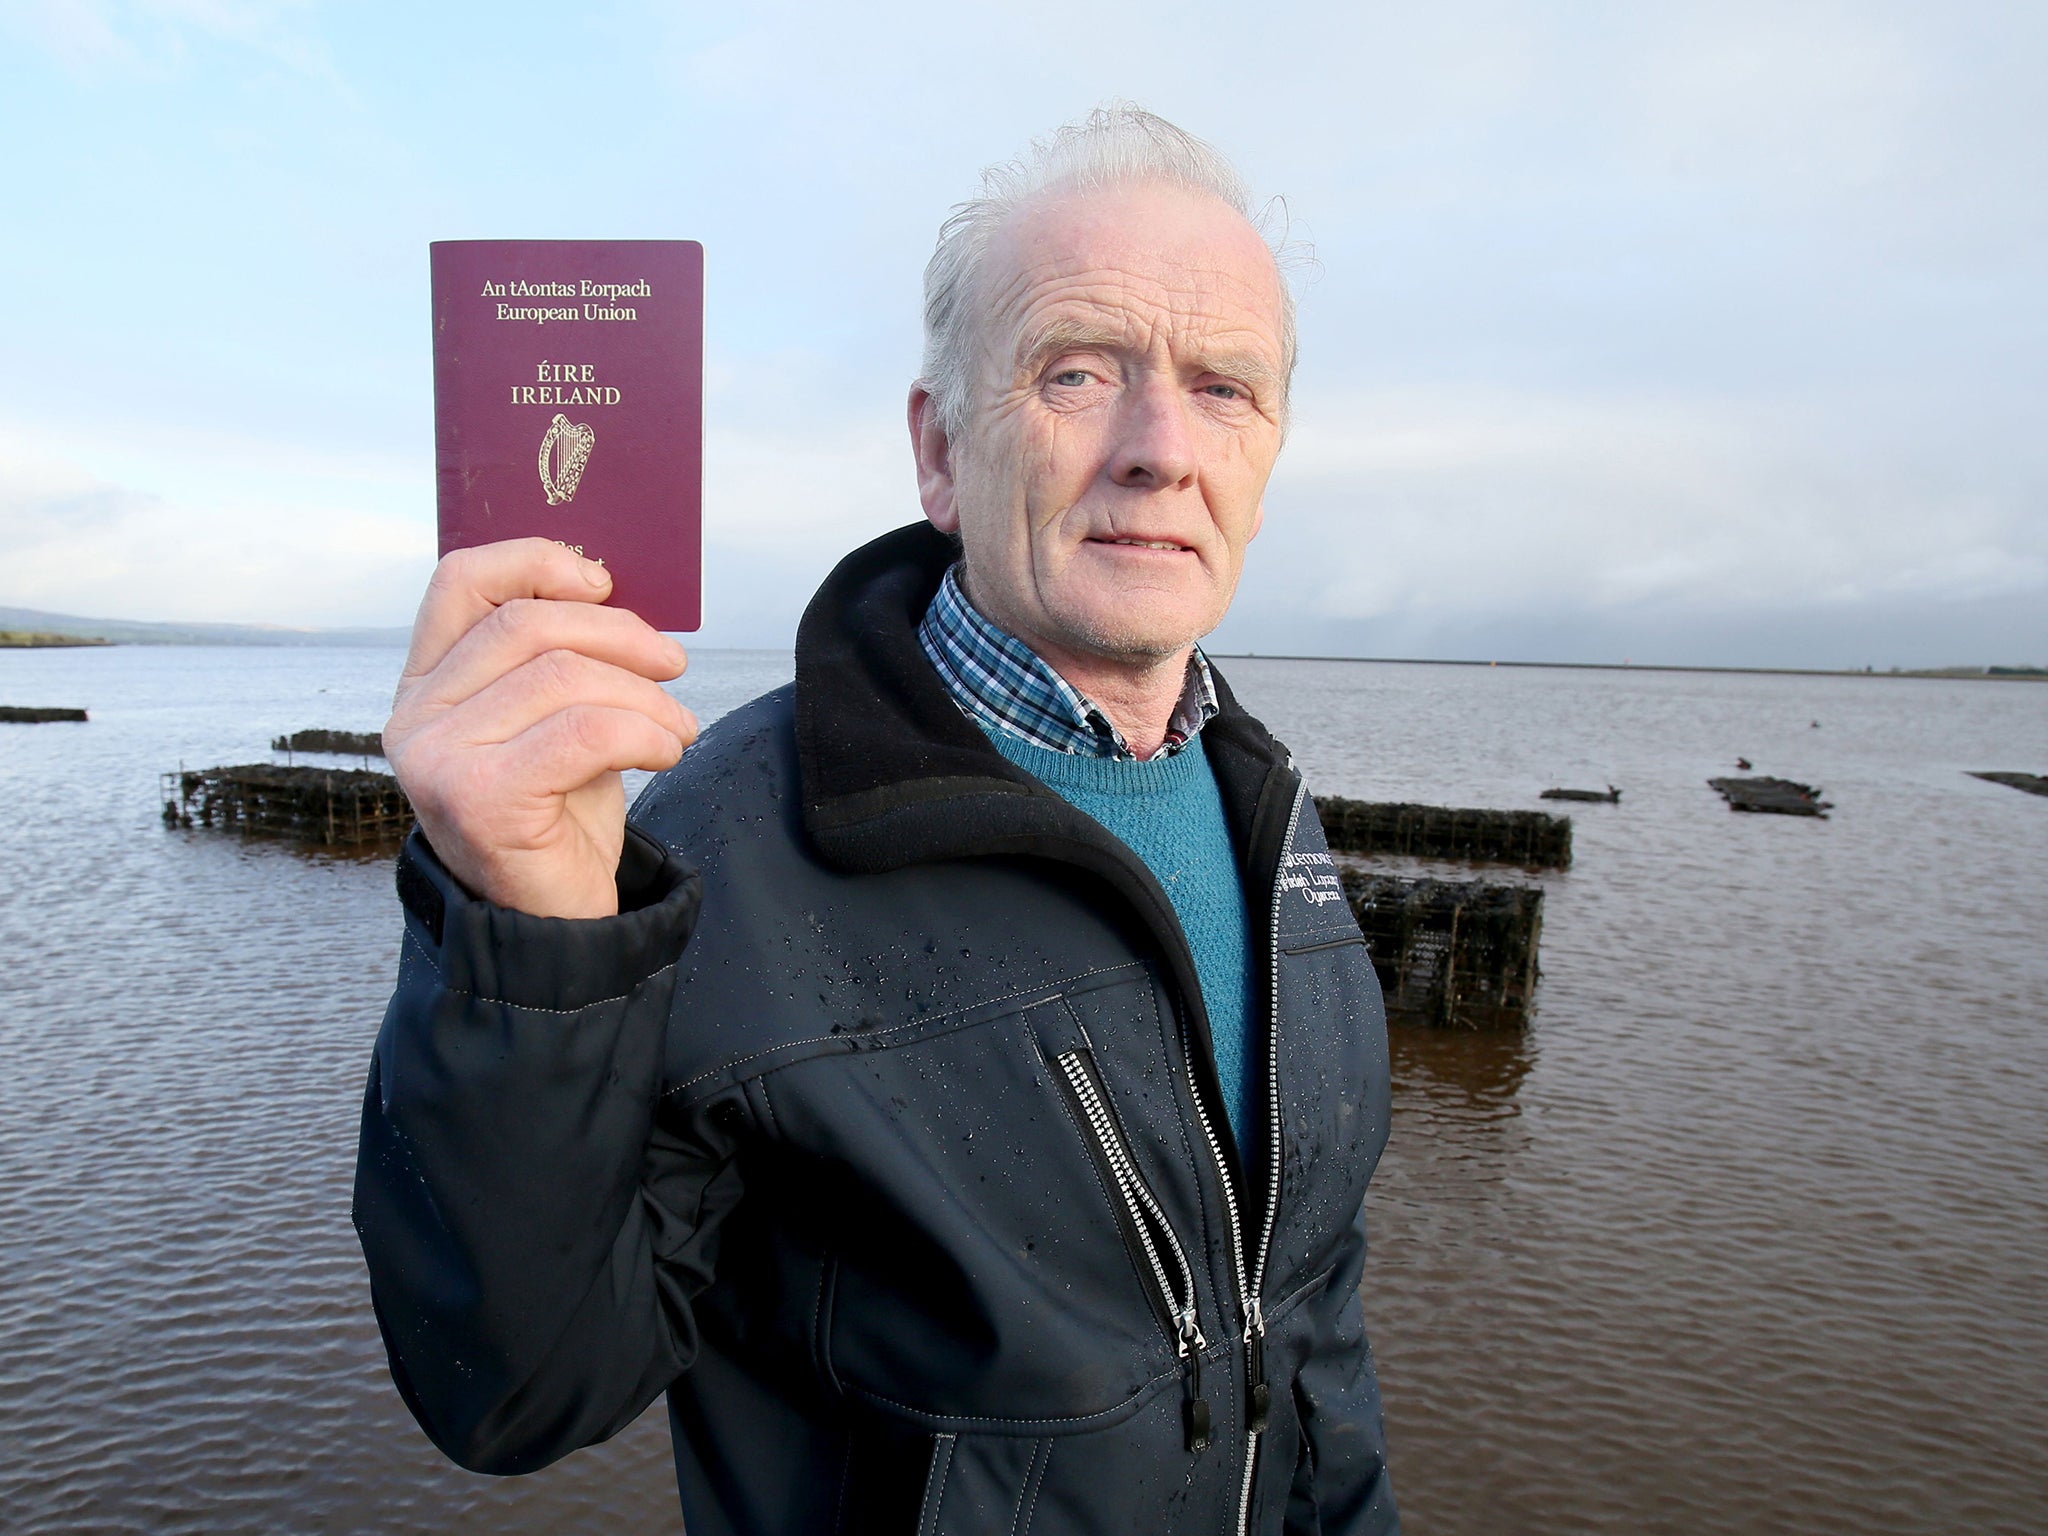 Almost 100,000 Irish passport applications were received from Great Britain in 2018, up from 81,000 last year and 46,000 in 2015